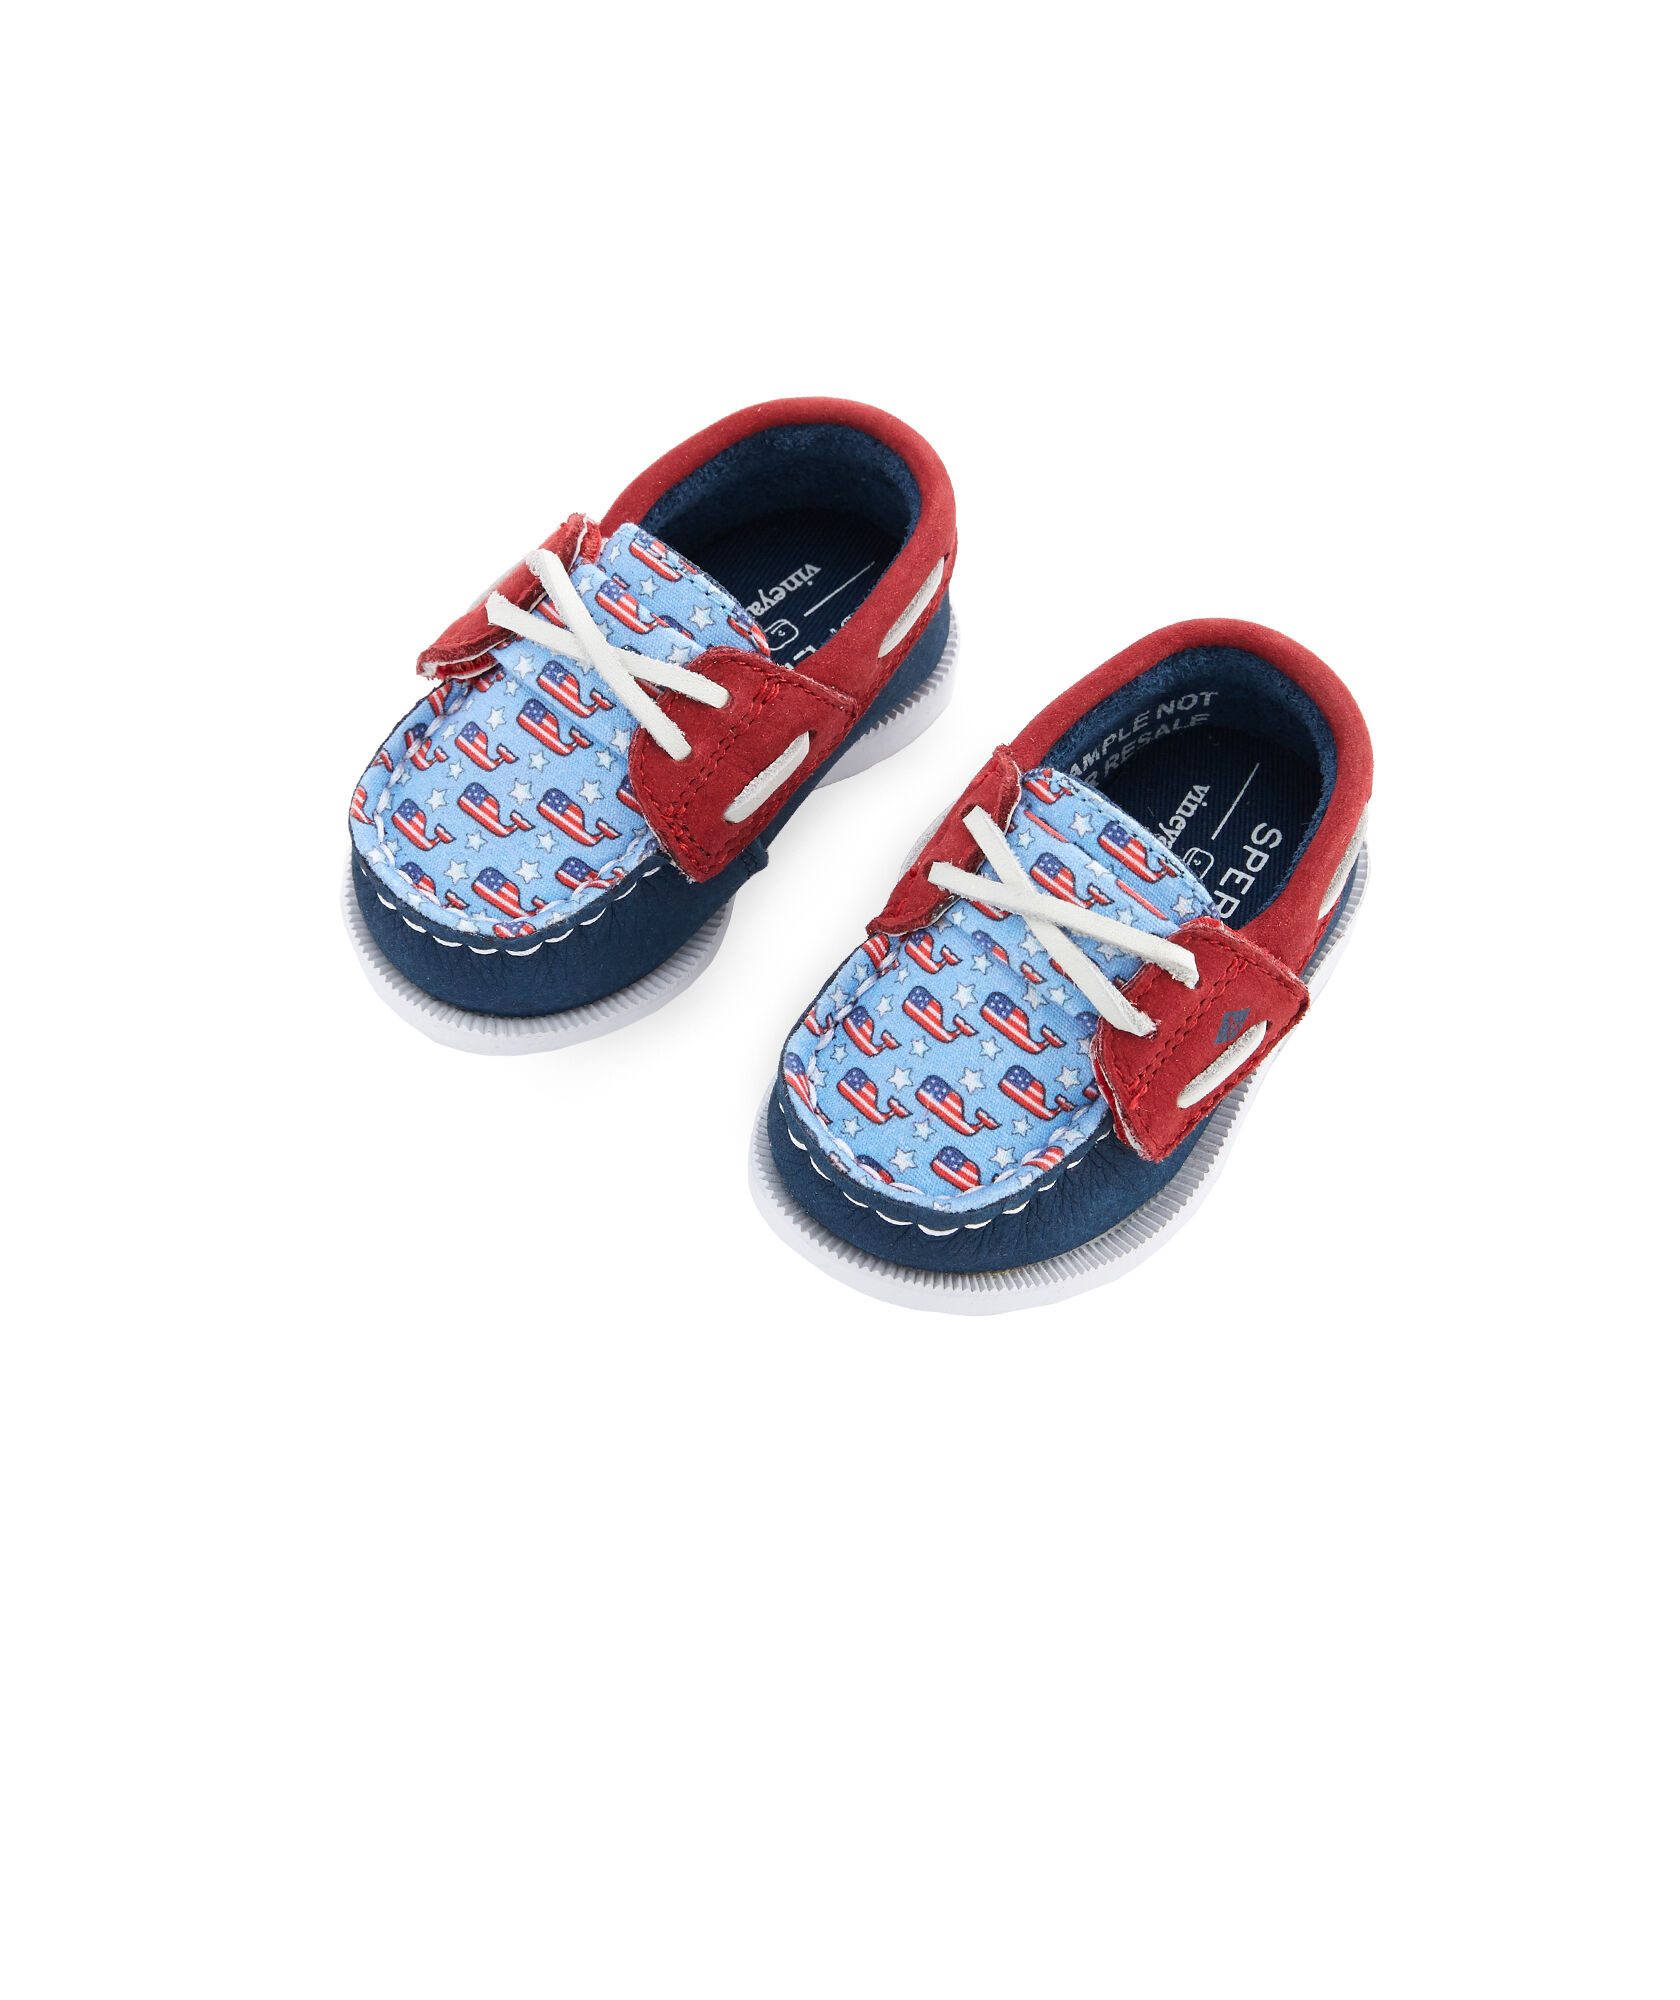 sperry shoes for infants